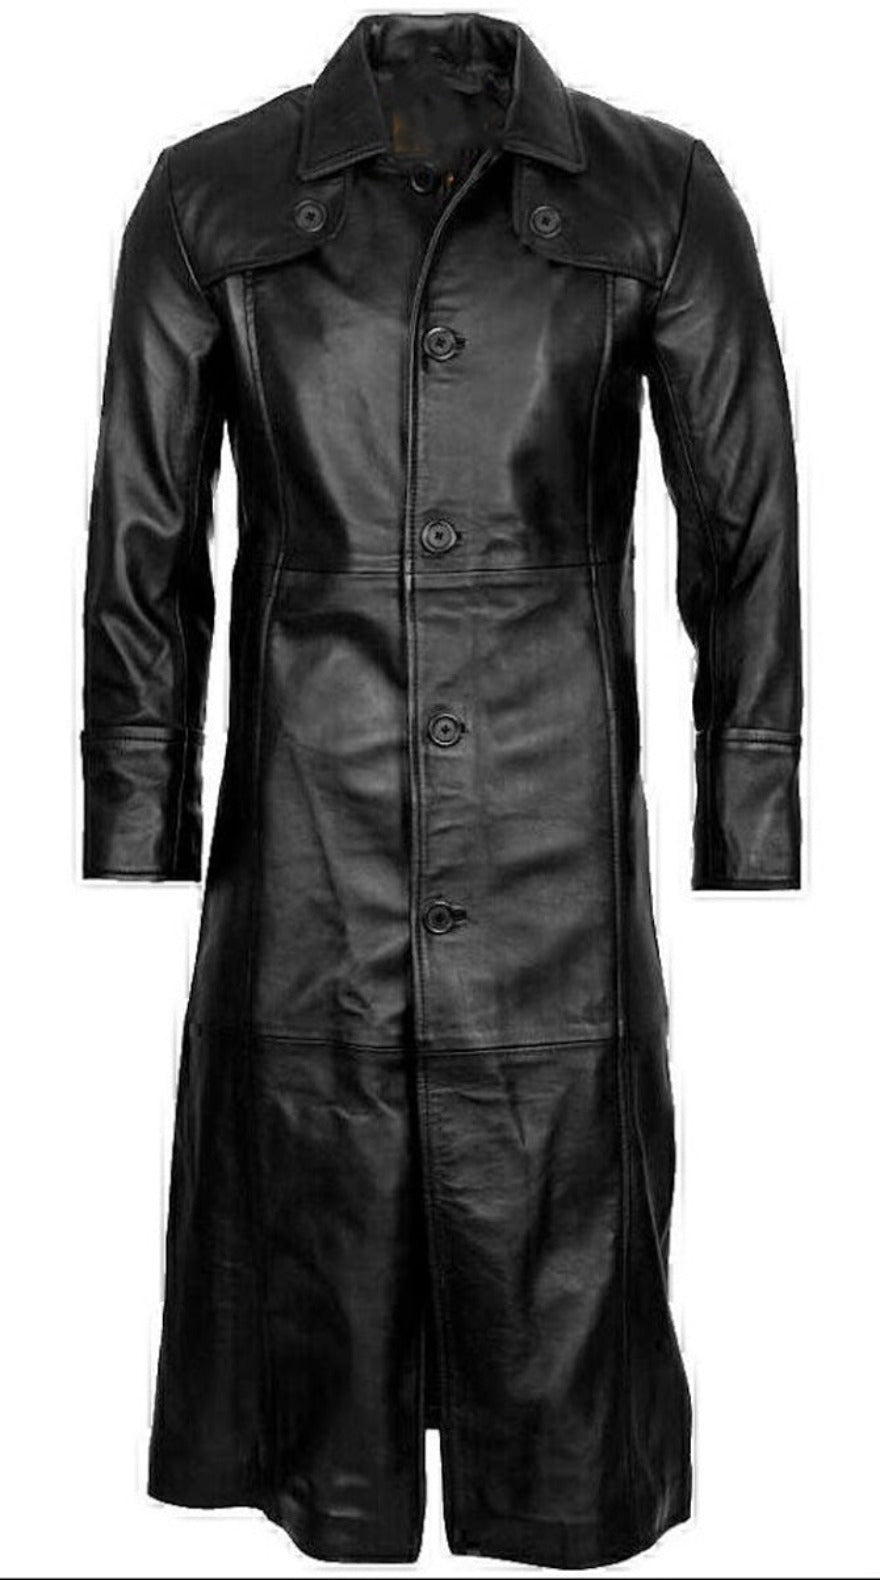 Picture of our 4 button  Mens Leather Trench Coat Full Length in black, front view.